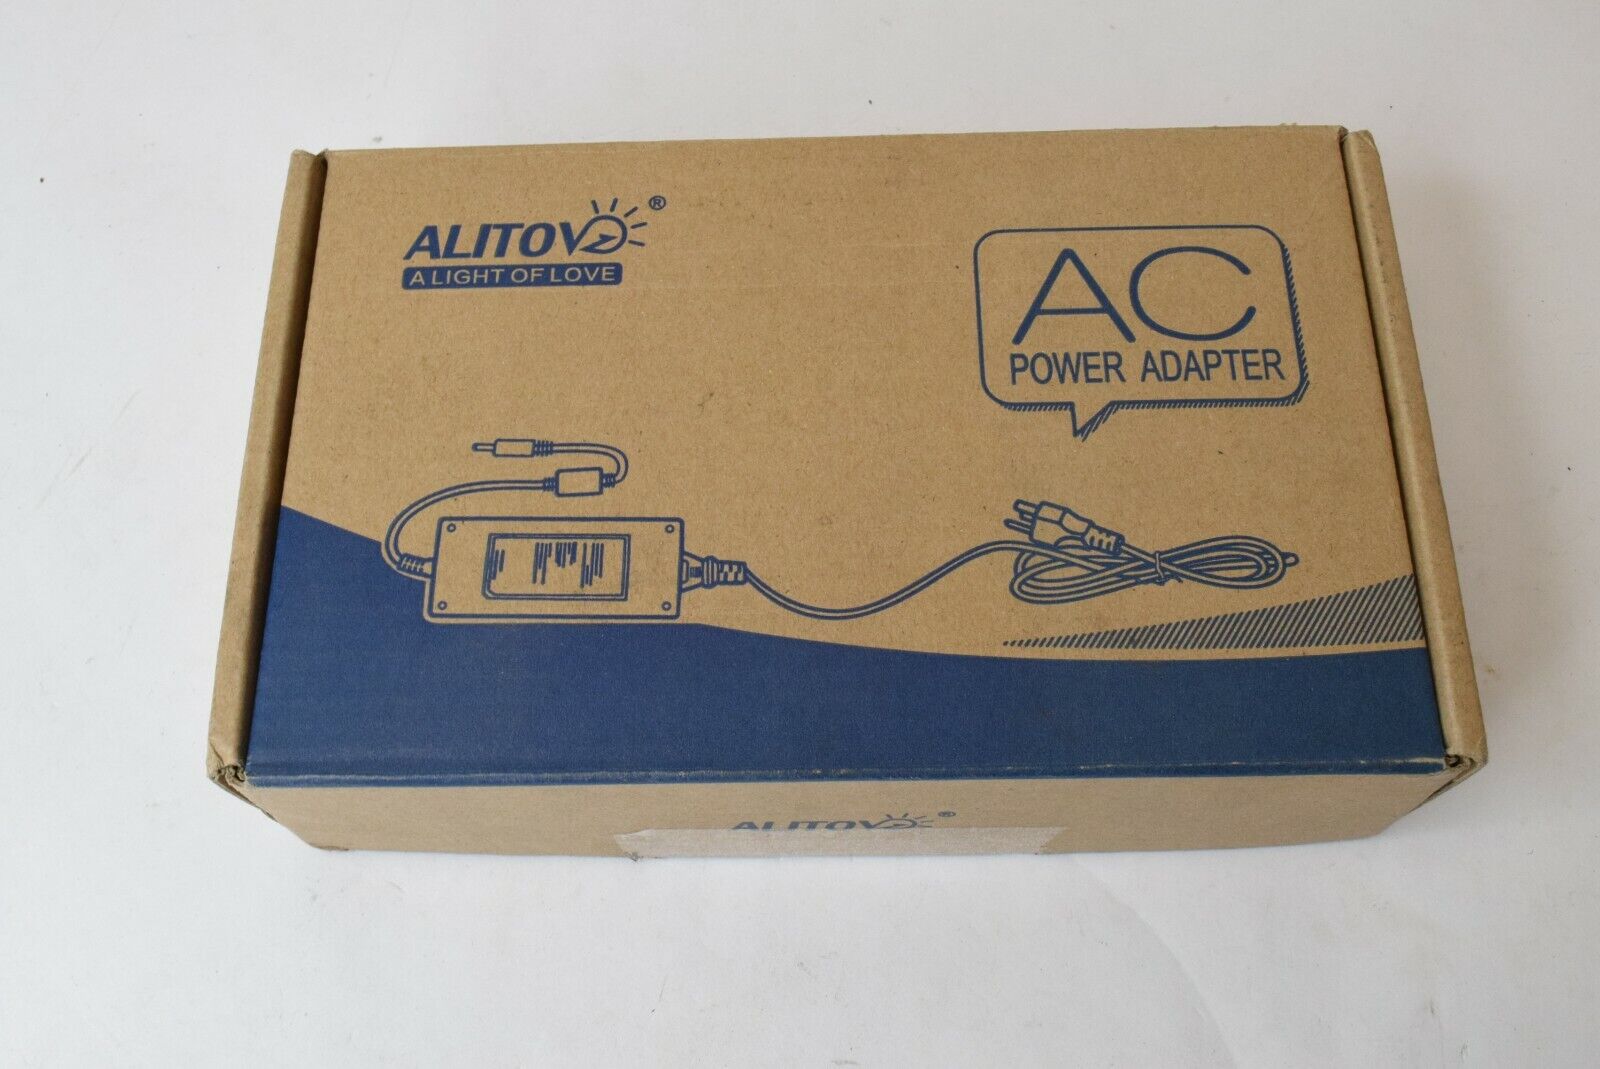 ALITOVE Power Supply Adapter Unit JC0510 5V 10A Type: Adapter Features: Powered Output Voltage: 5 V Brand: ALITO